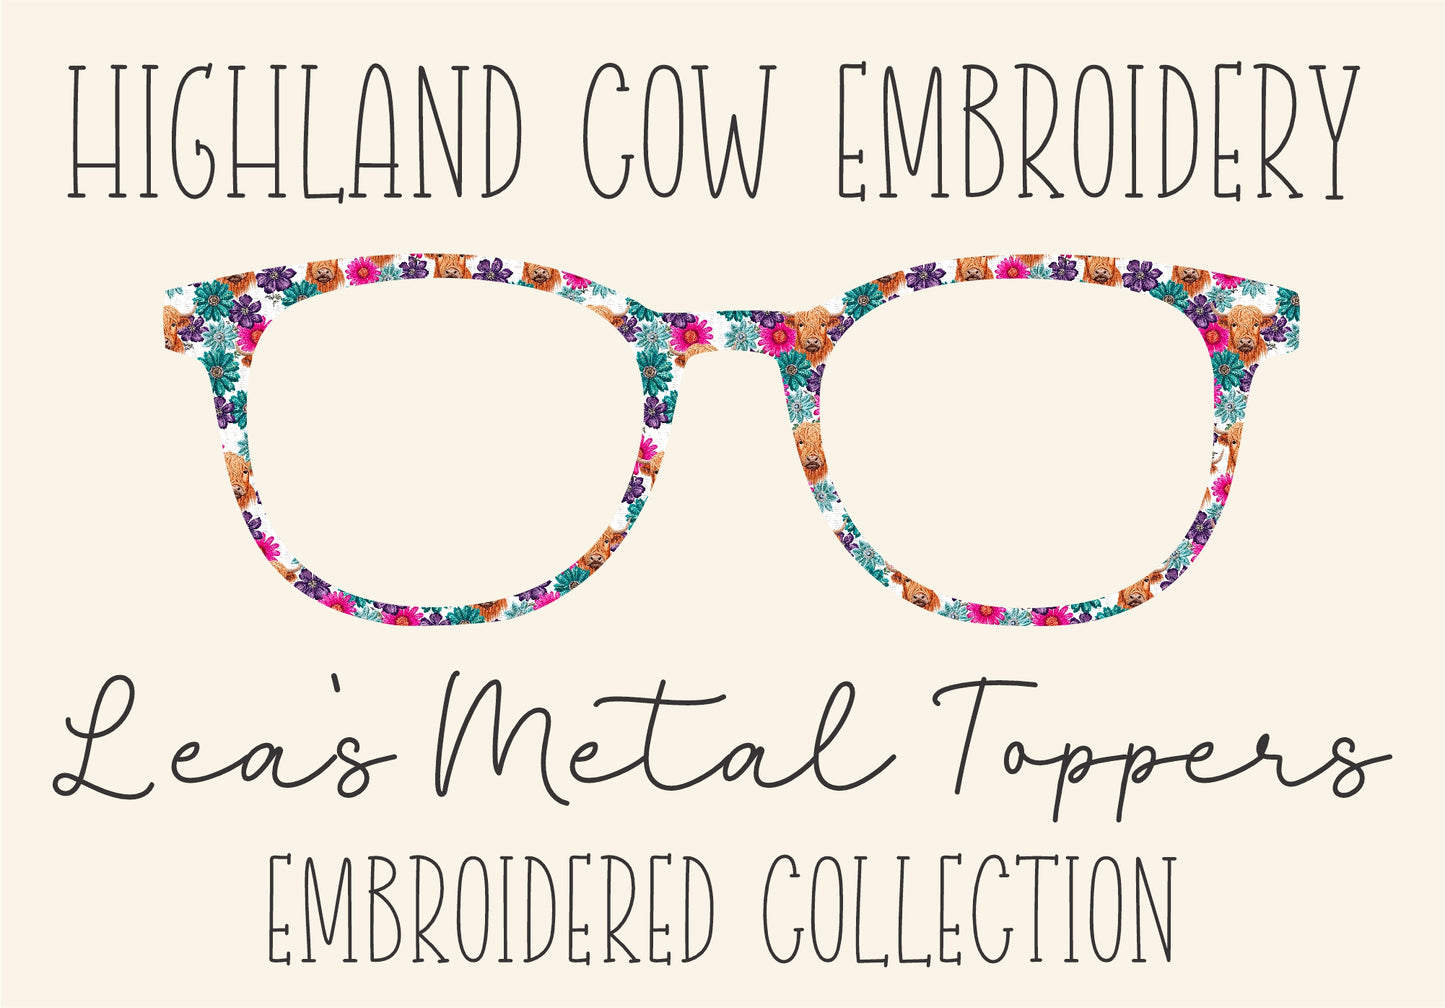 HIGHLAND COW EMBROIDERY Eyewear Frame Toppers COMES WITH MAGNETS